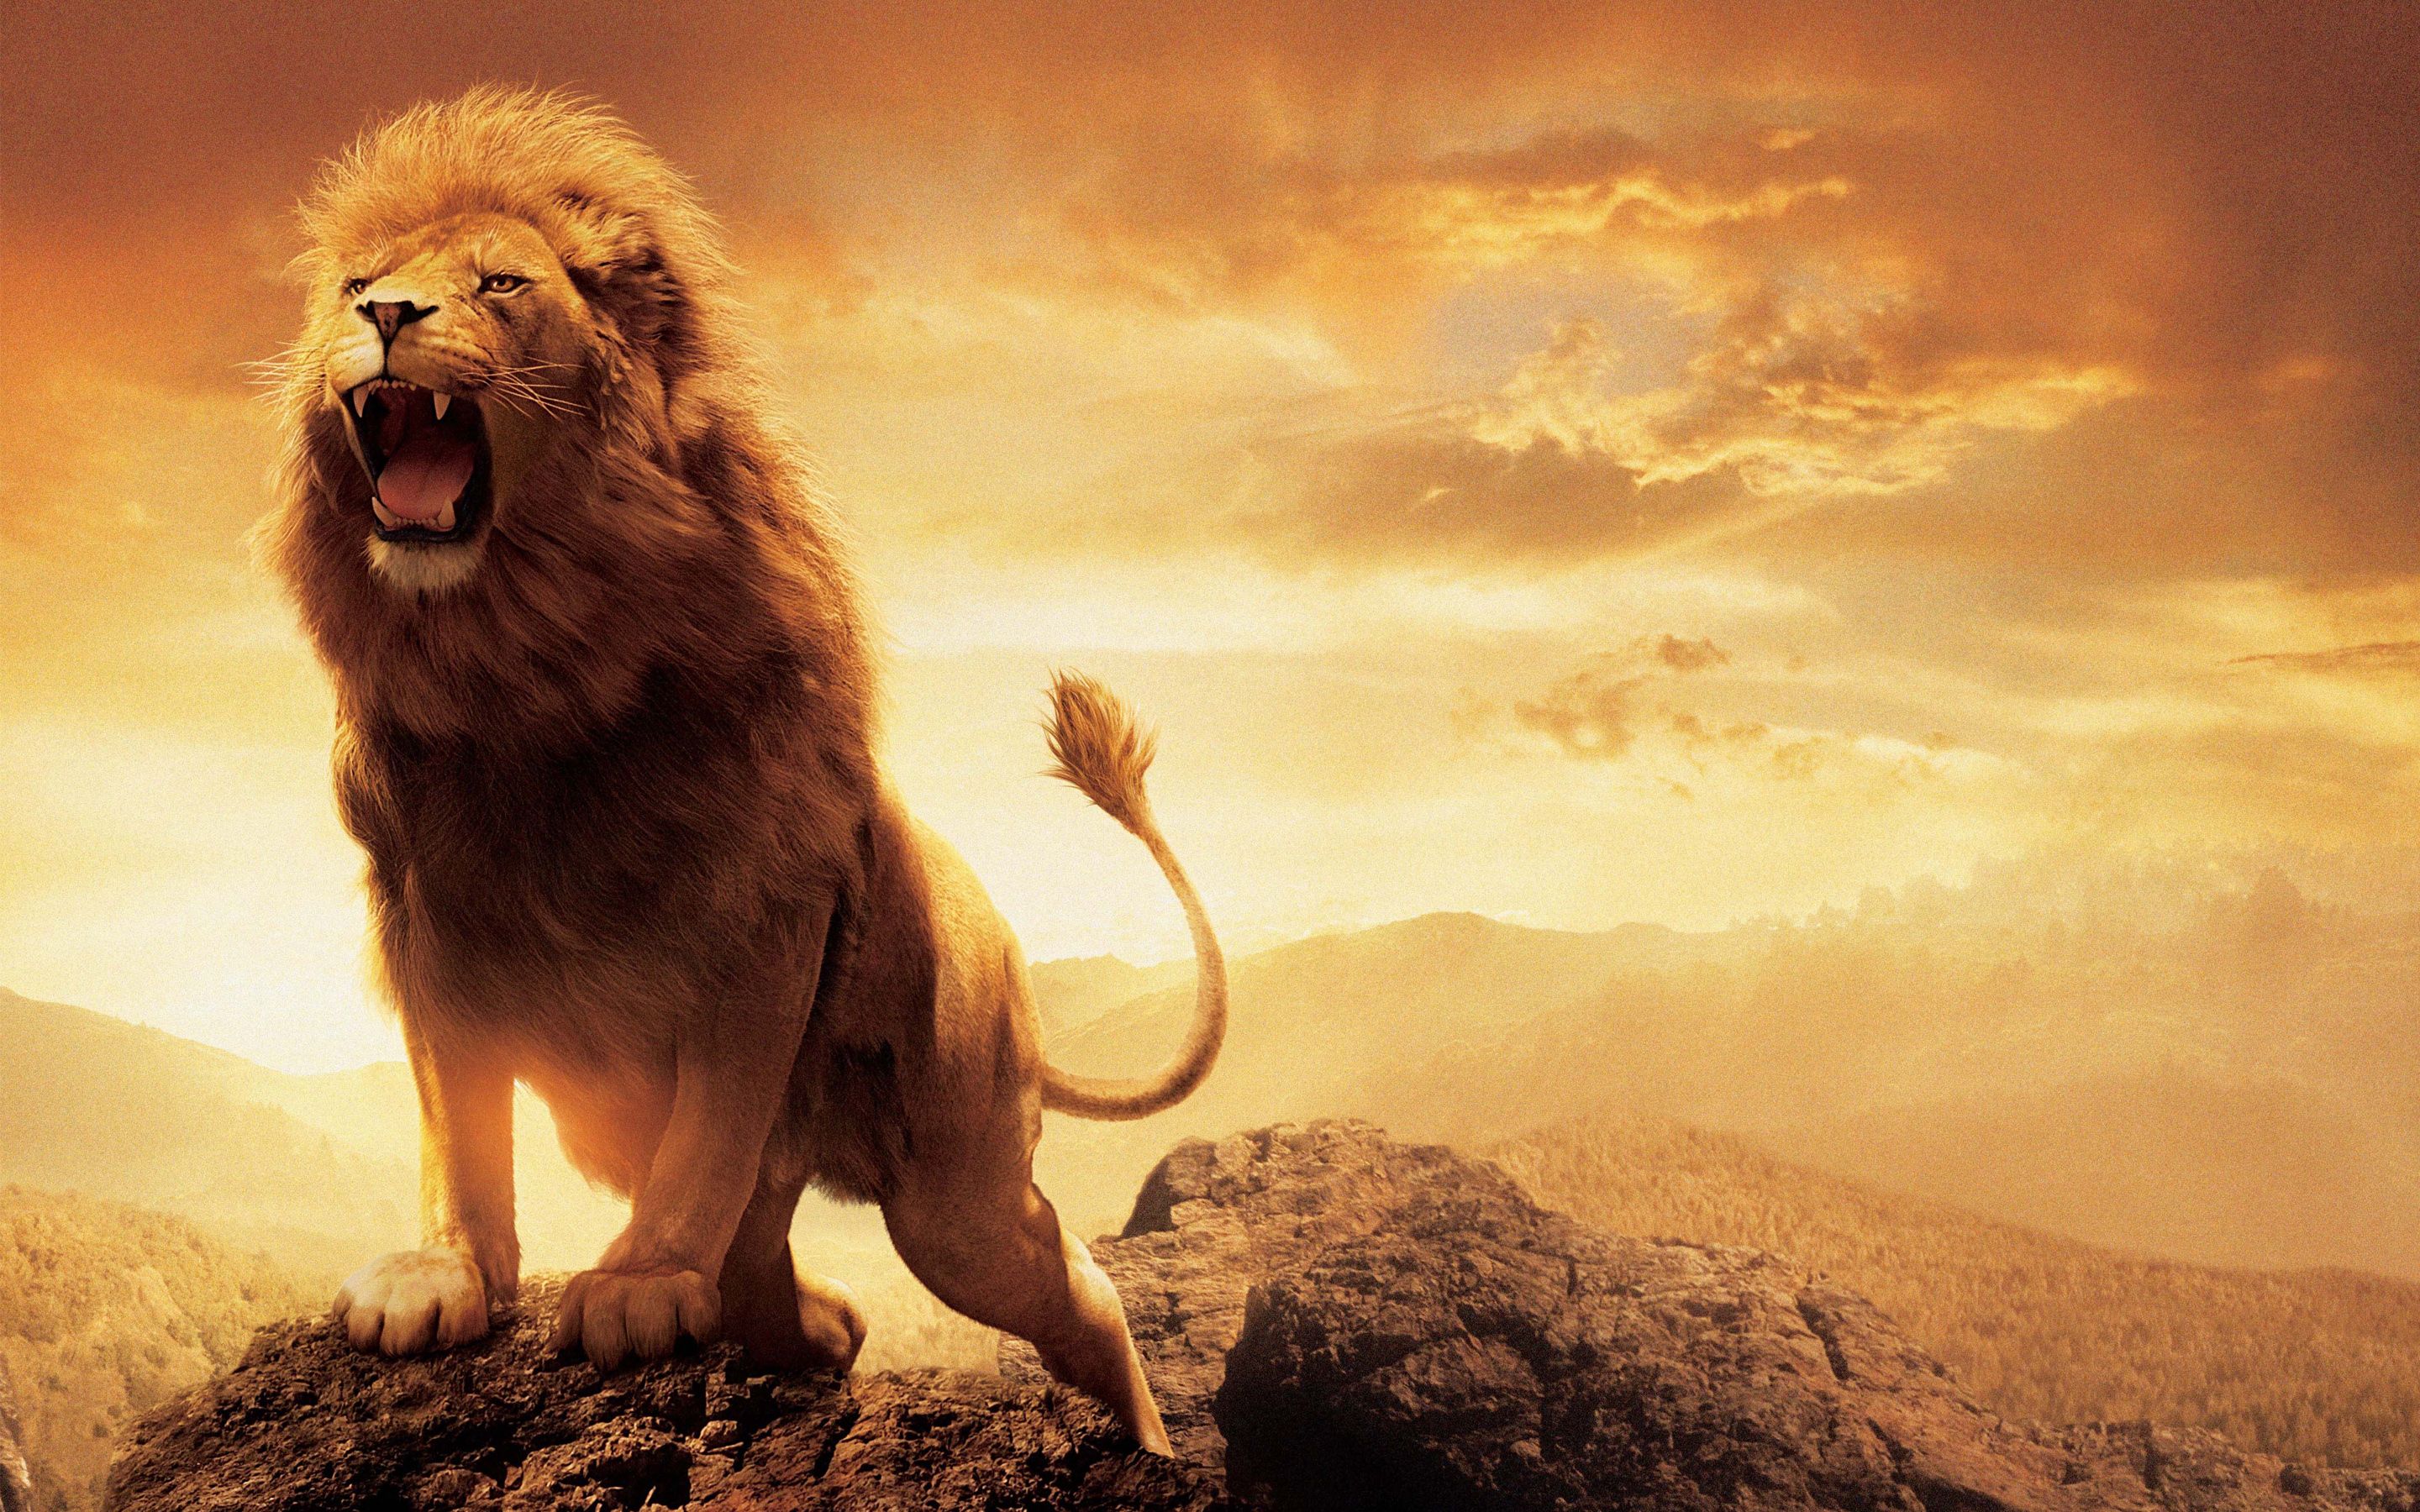 The Chronicles of Narnia: The Lion, the Witch and the Wardrobe HD